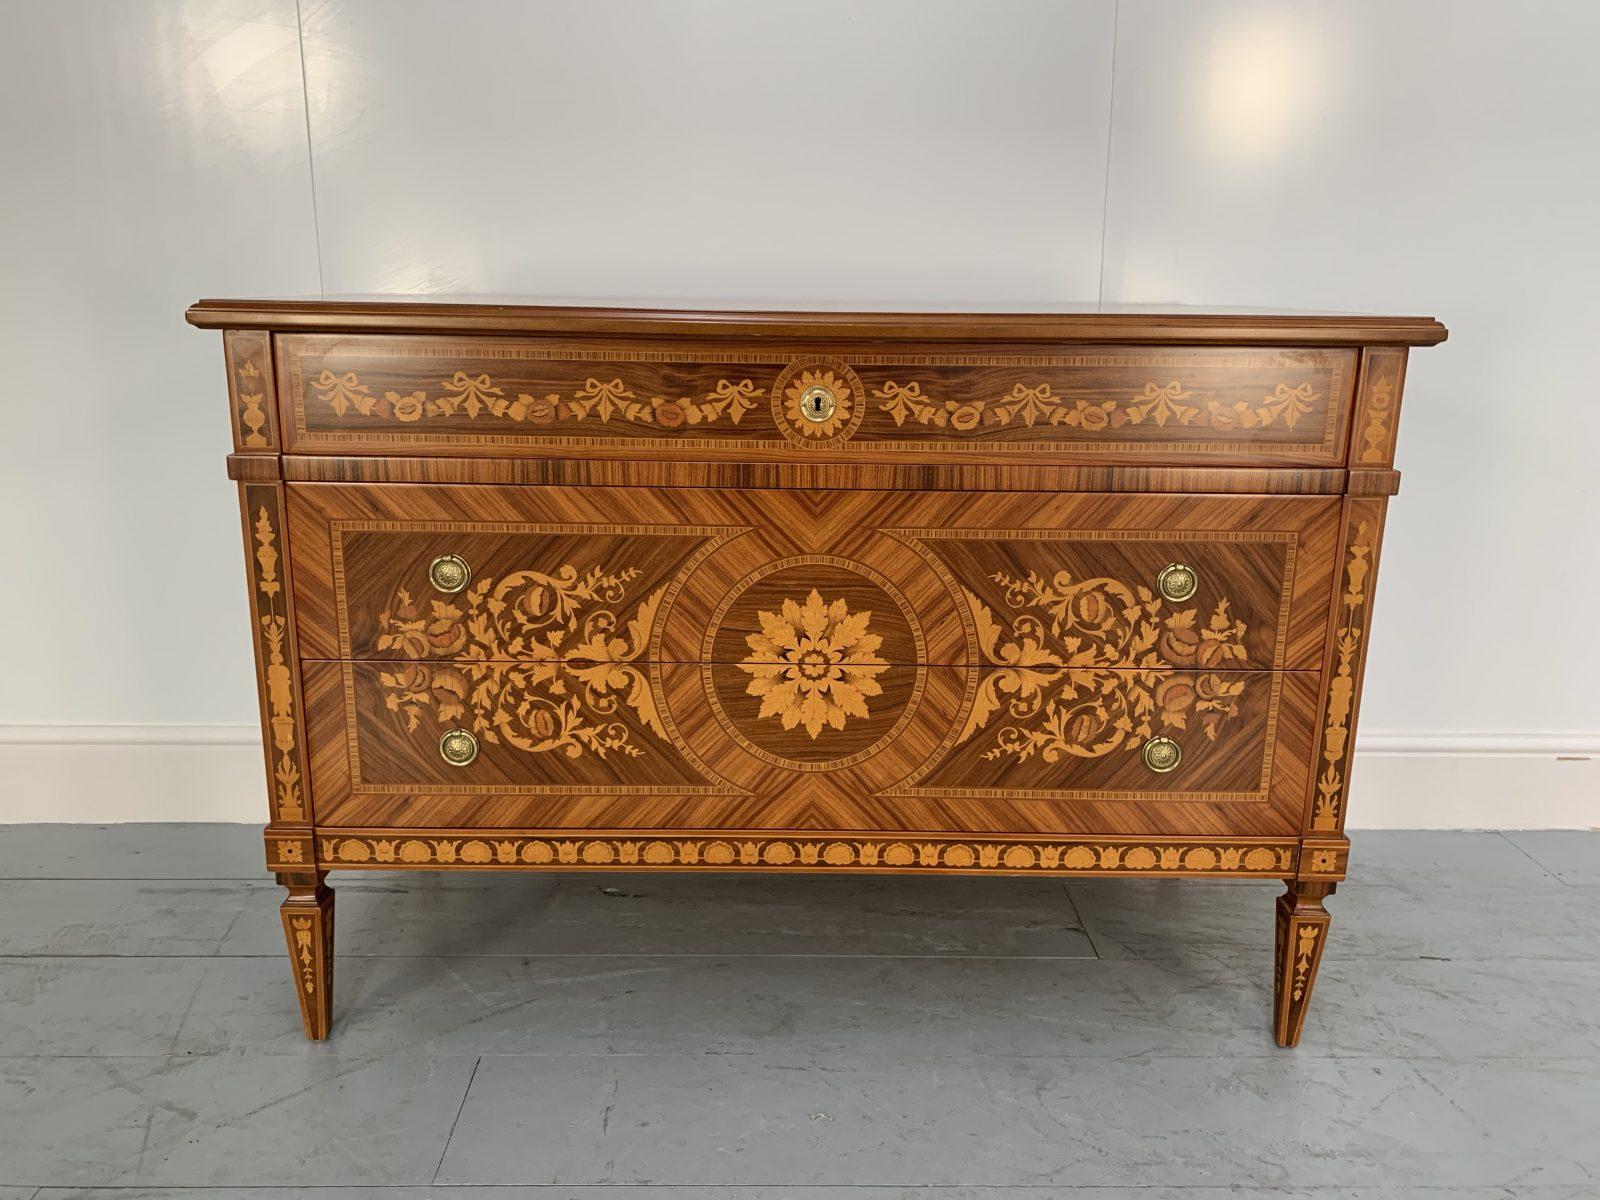 By choosing to view this listing, I can only assume you are familiar with the world-renown “Asnaghi” brand, and fully-understand the nature of what is on offer.

Asnaghi make pieces of furniture that are far more than just that. They create real